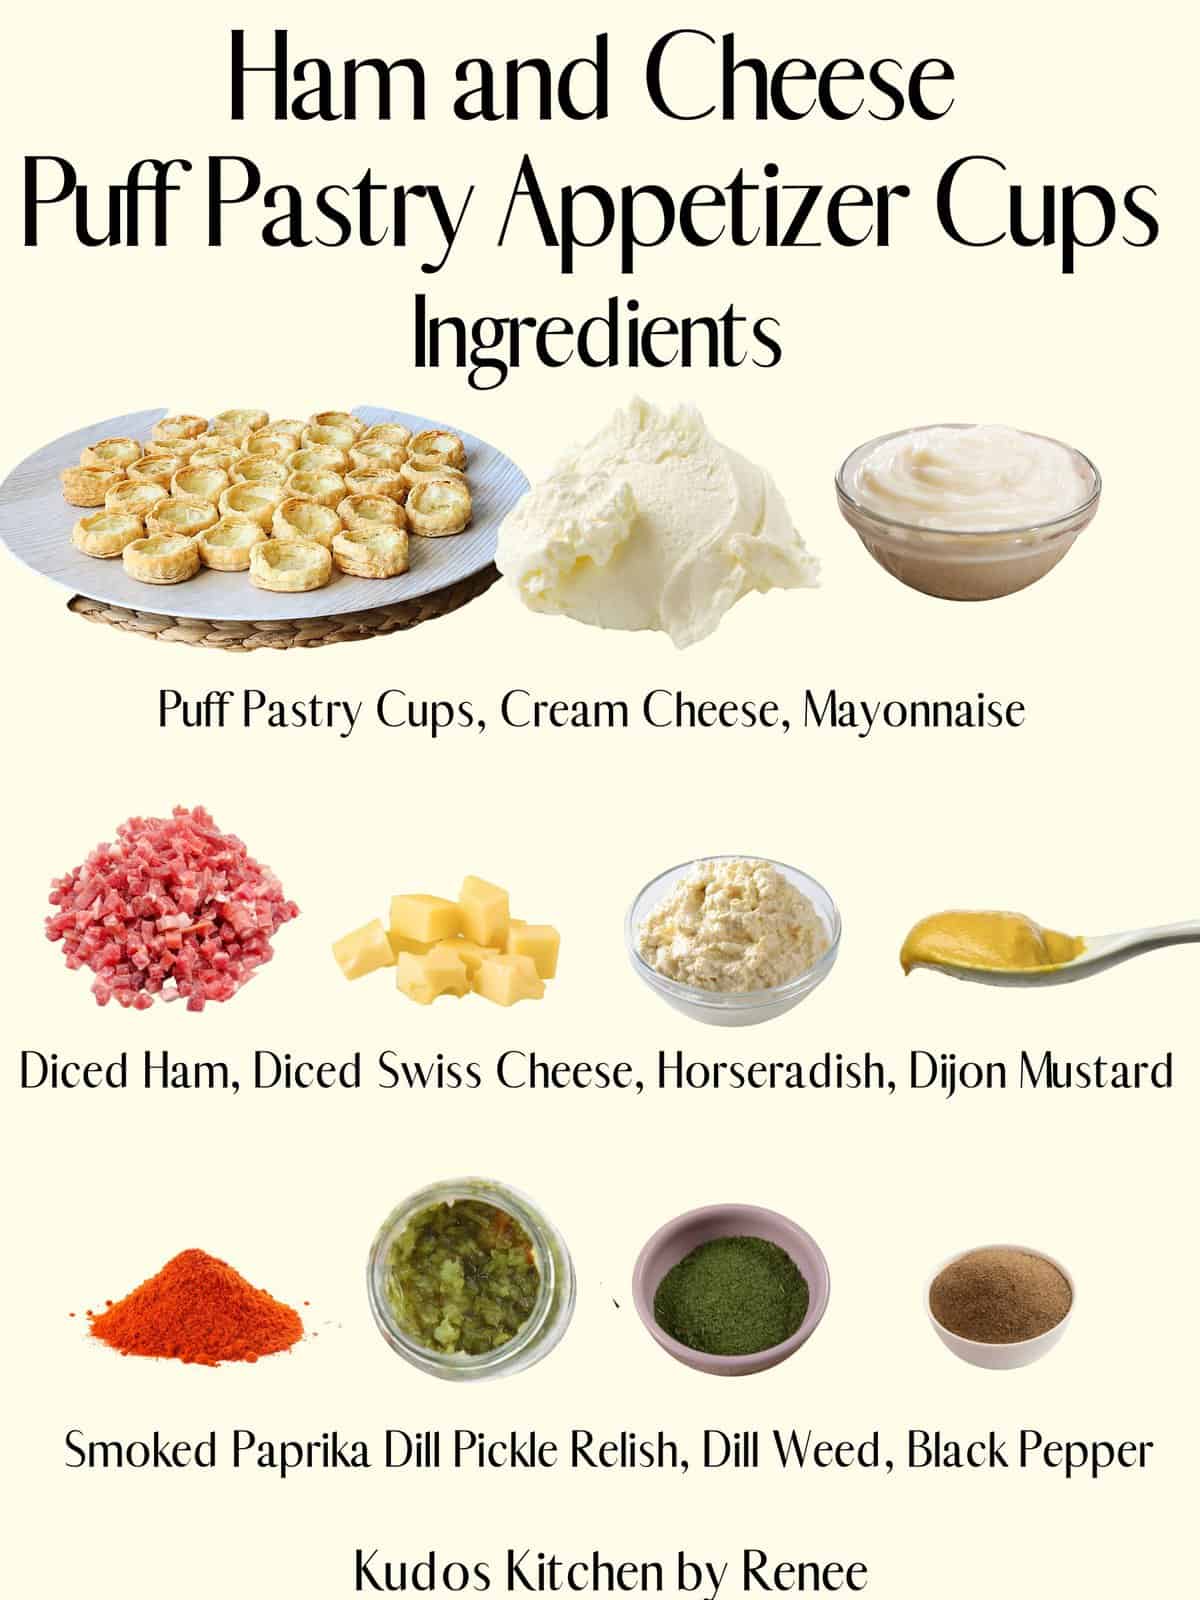 A visual ingredient list for making Ham and Cheese Puff Pastry Appetizer Cups.